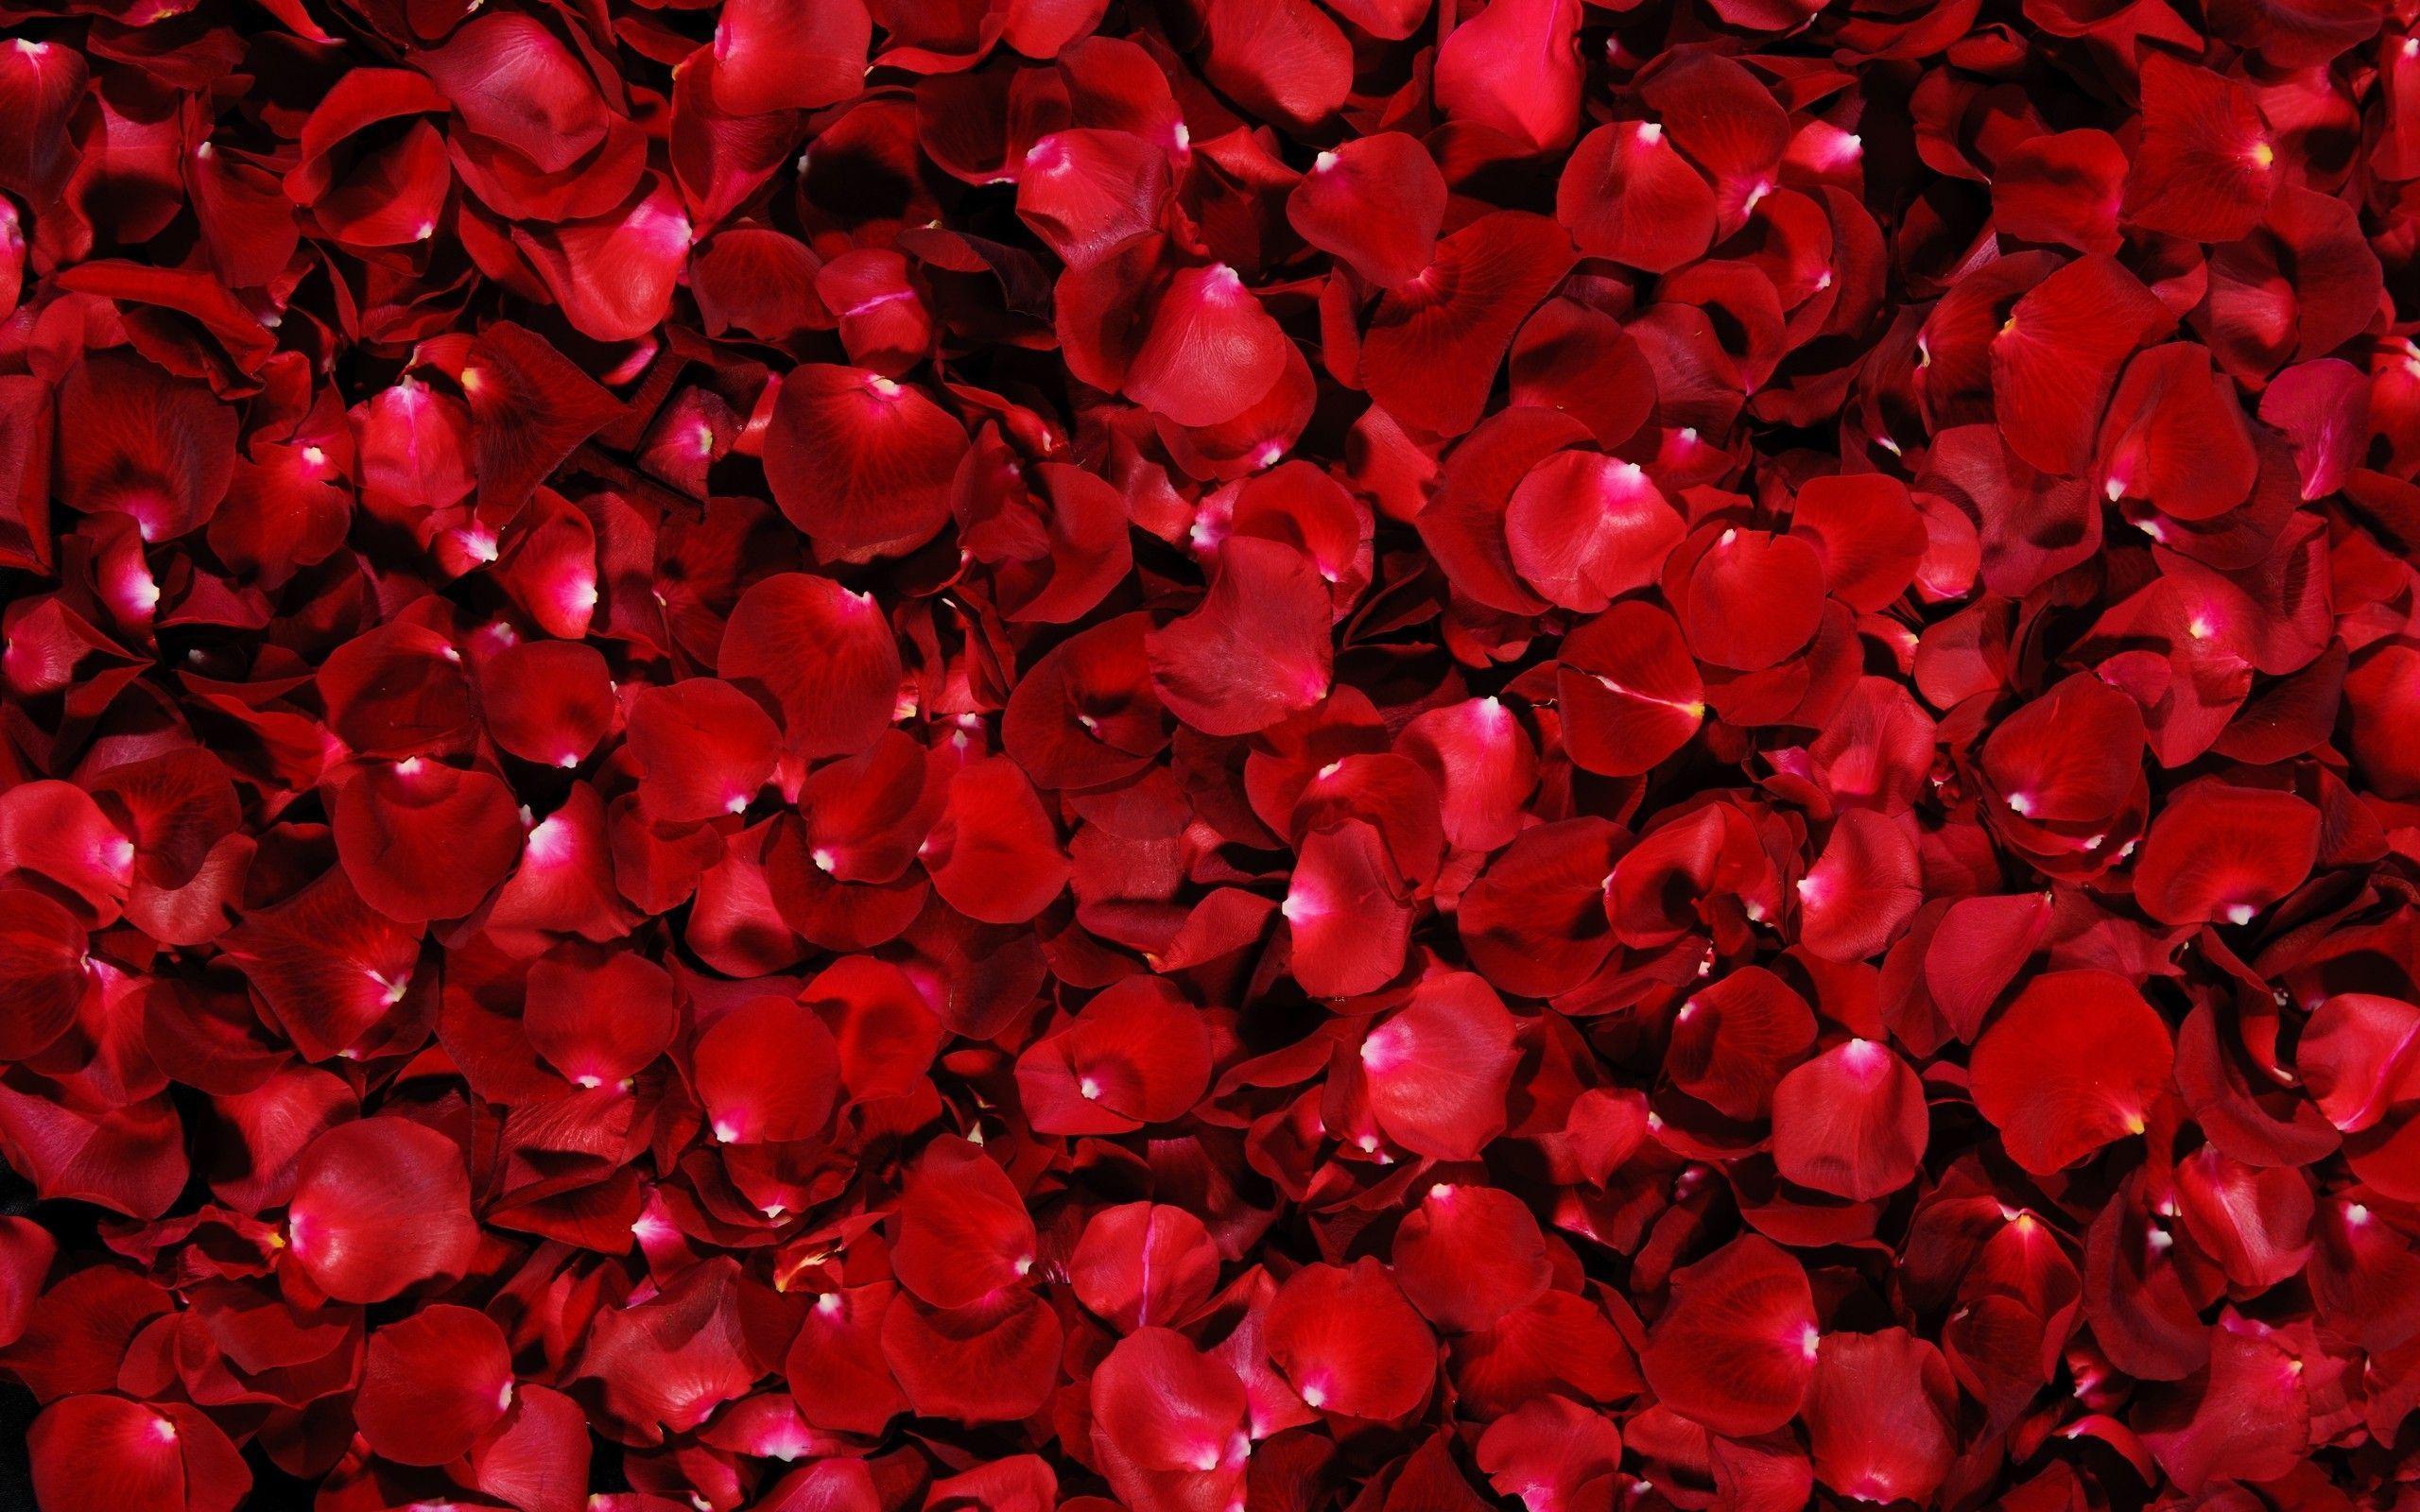 Red Roses Backgrounds - Wallpaper Cave